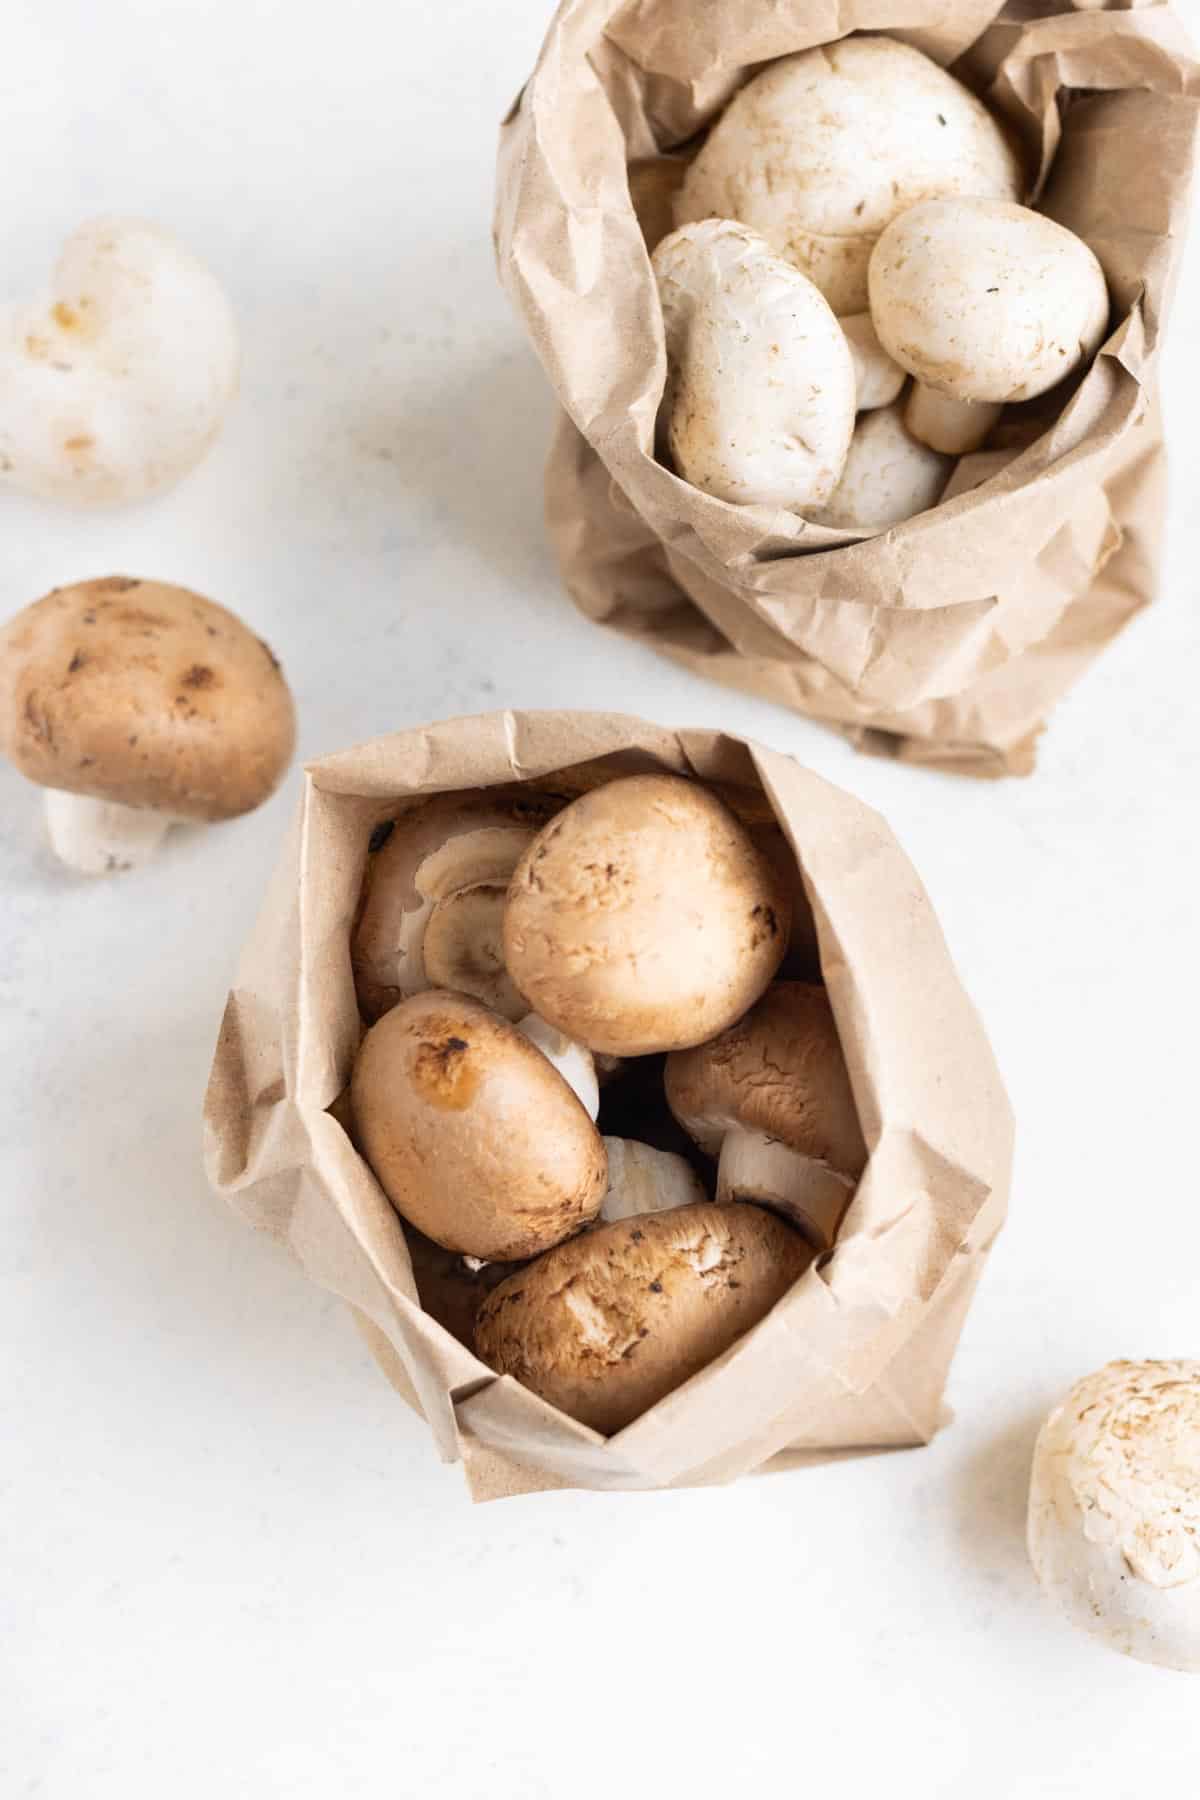 A brown paper bag of whole mushrooms on the countertop.